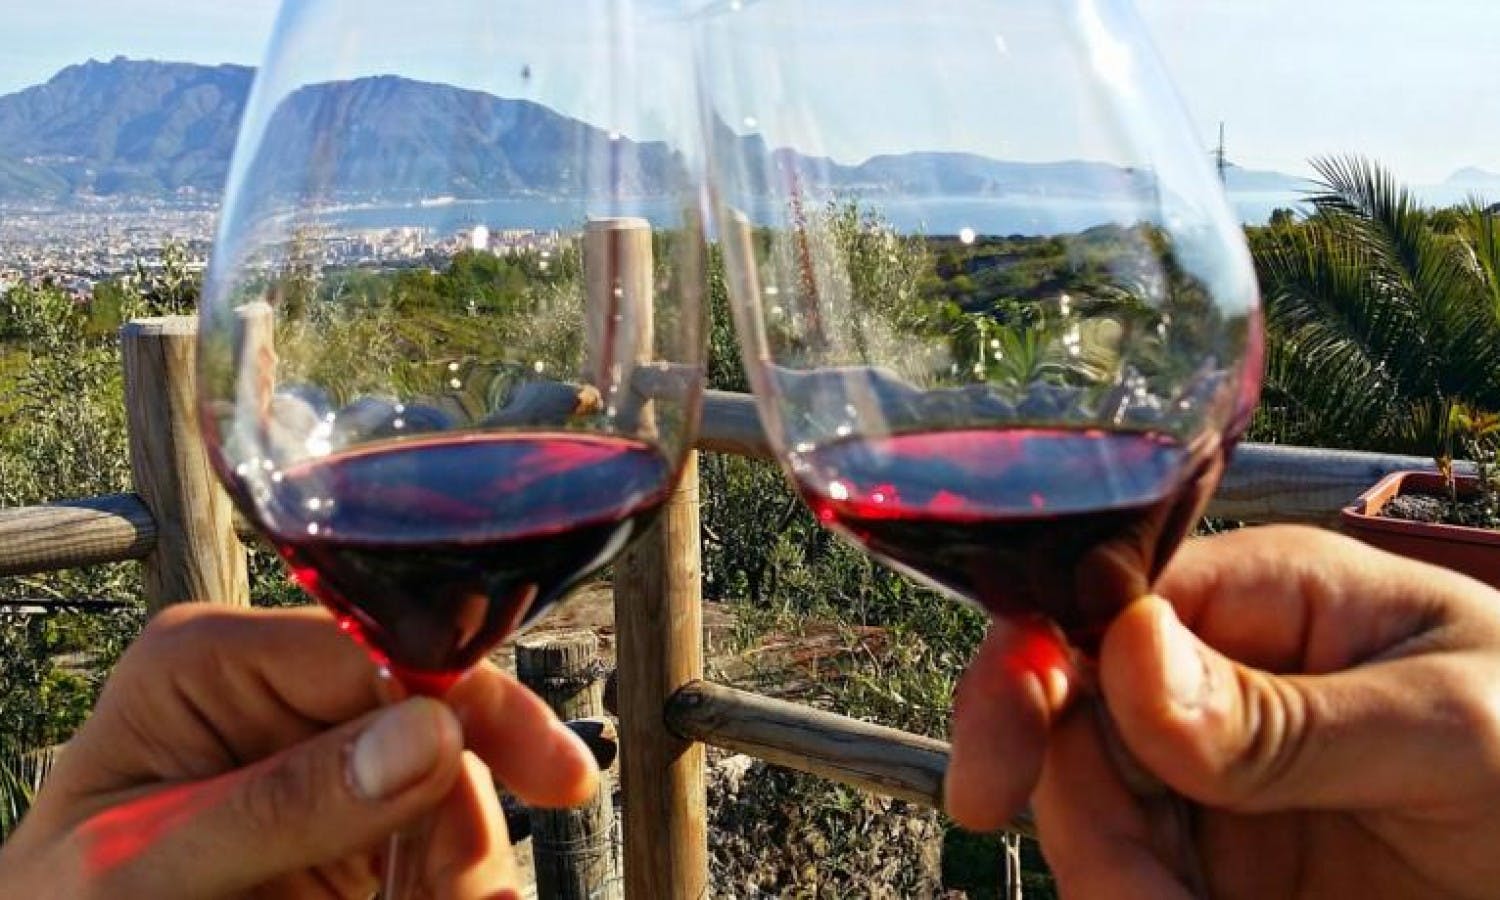 Wine tasting experience on Mount Vesuvius with lunch